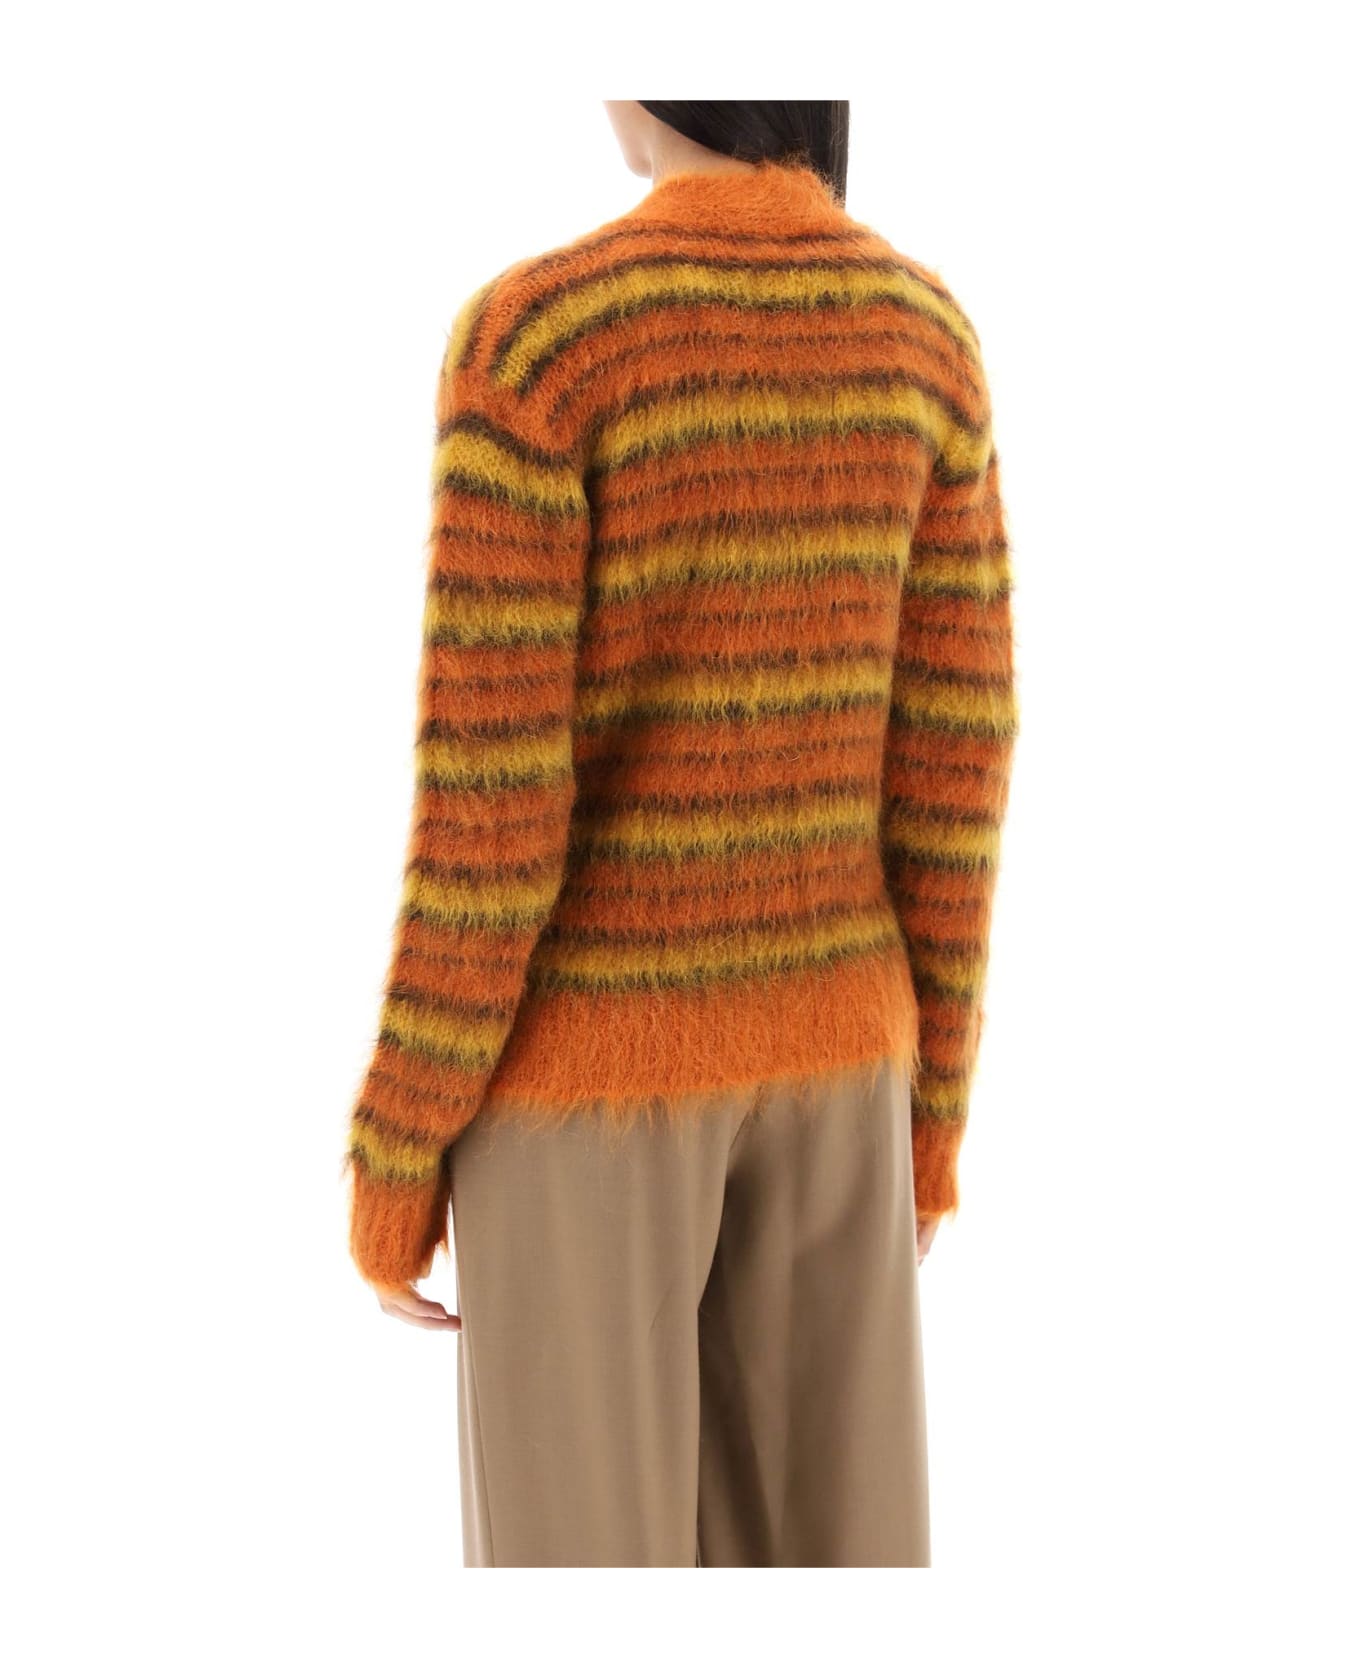 Marni Cardigan In Striped Brushed Mohair - LOBSTER (Orange)